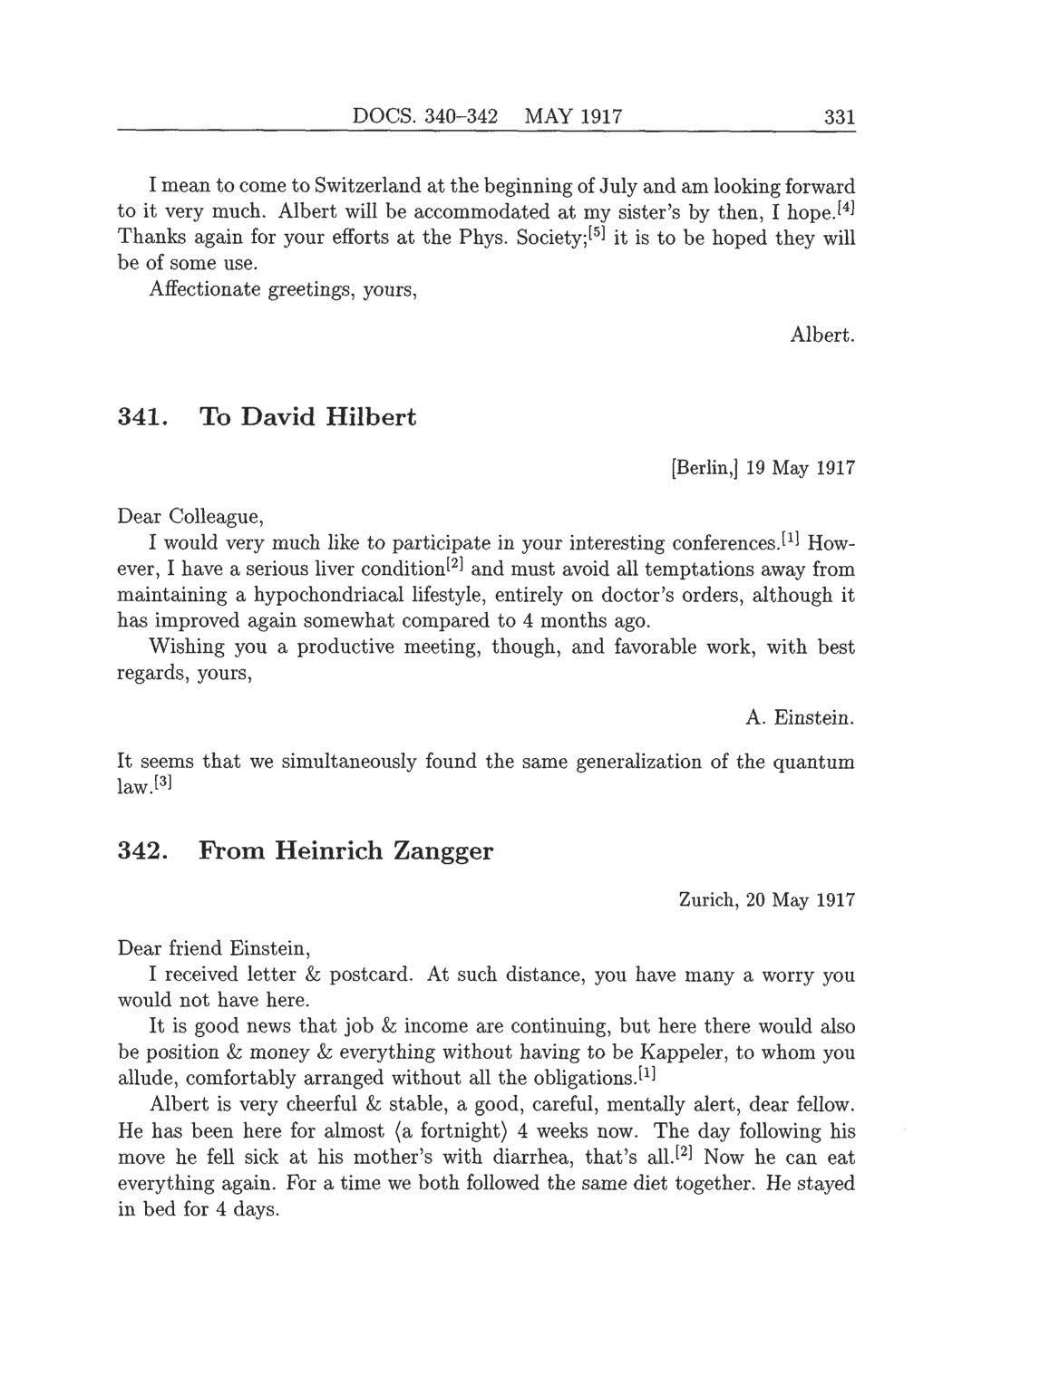 Volume 8: The Berlin Years: Correspondence, 1914-1918 (English translation supplement) page 331